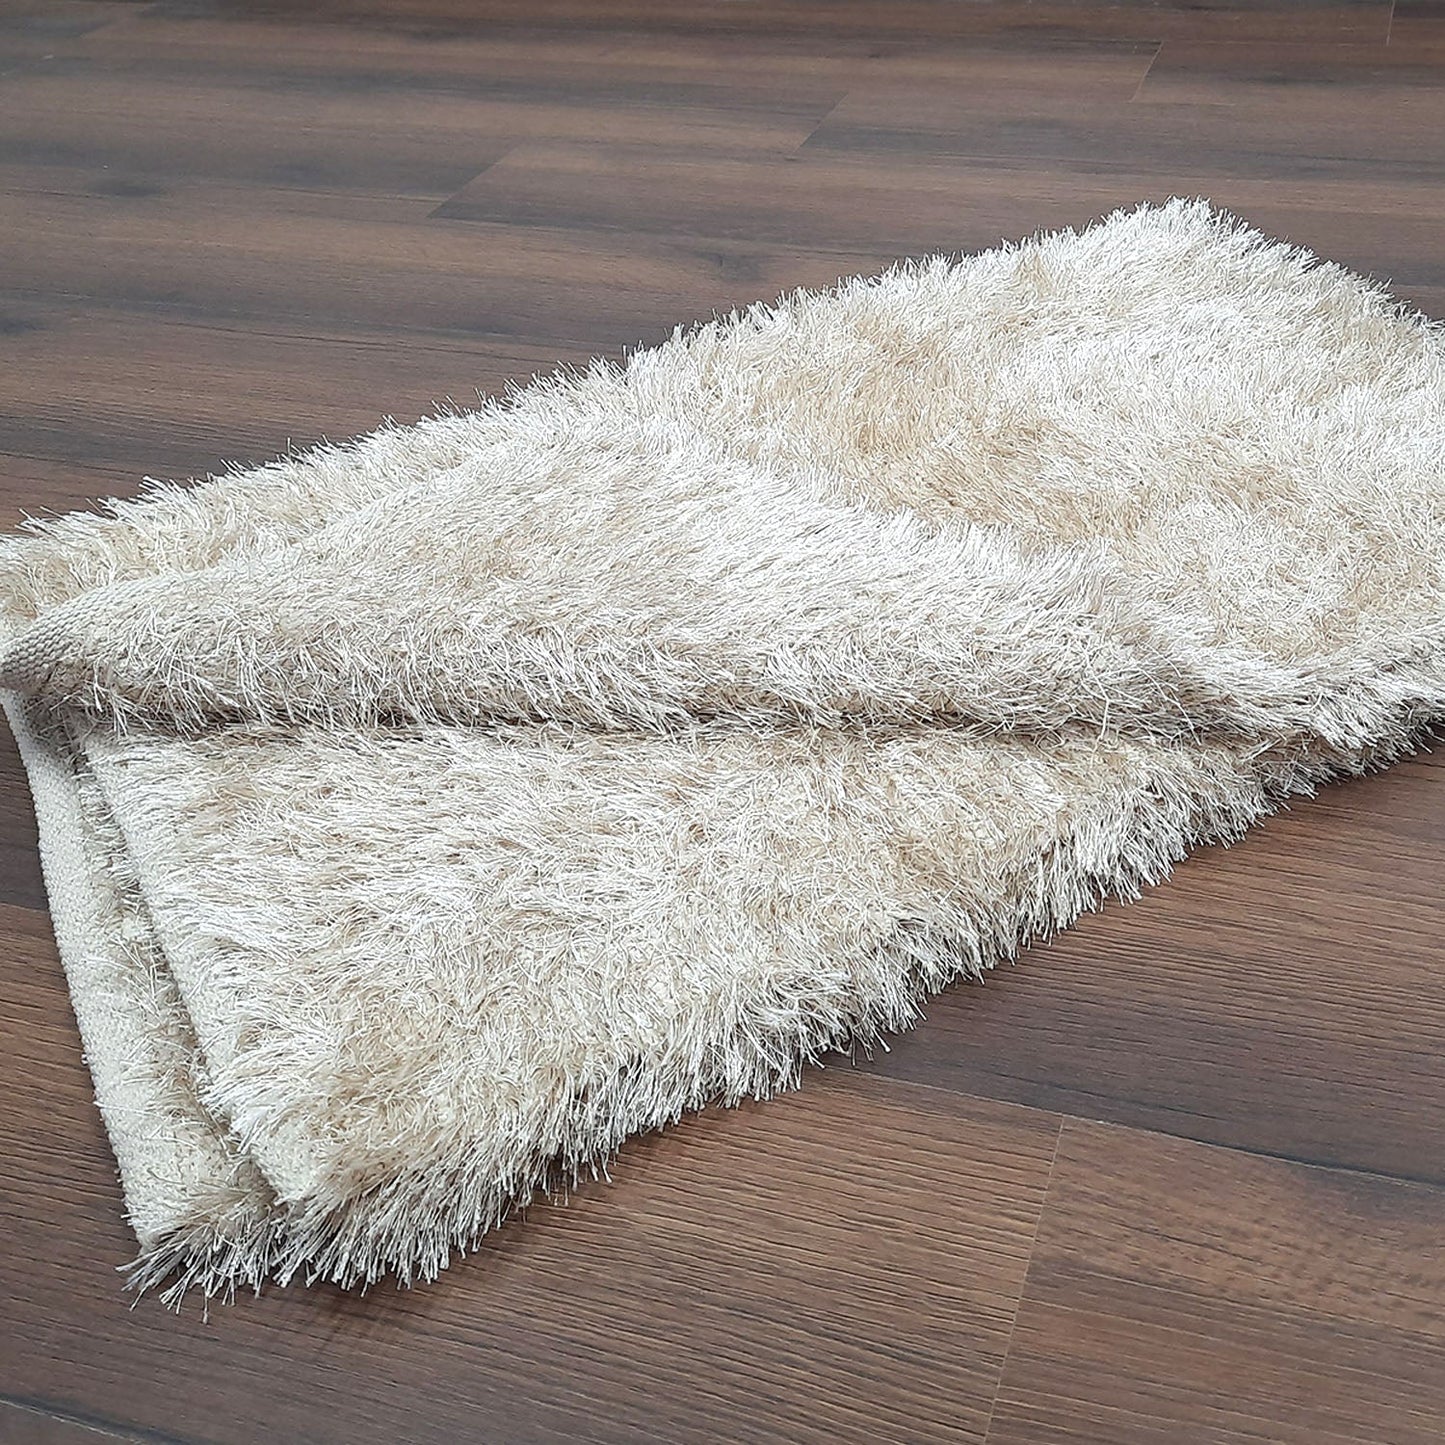 Fur Durry For Living Room|Beige|Reversible – Both sides same, Washable By Avioni